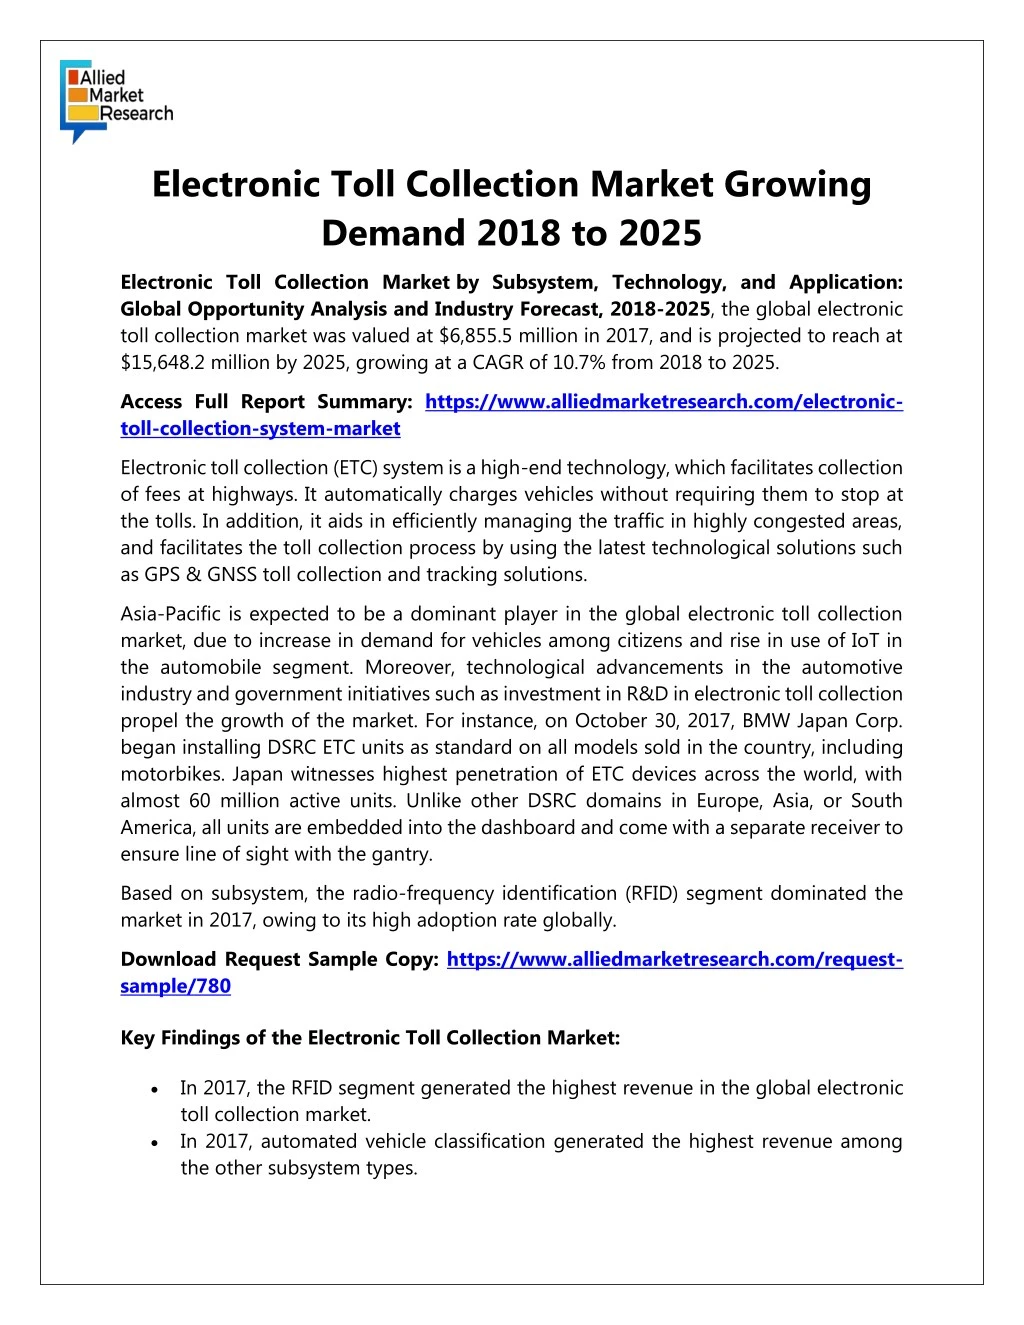 electronic toll collection market growing demand